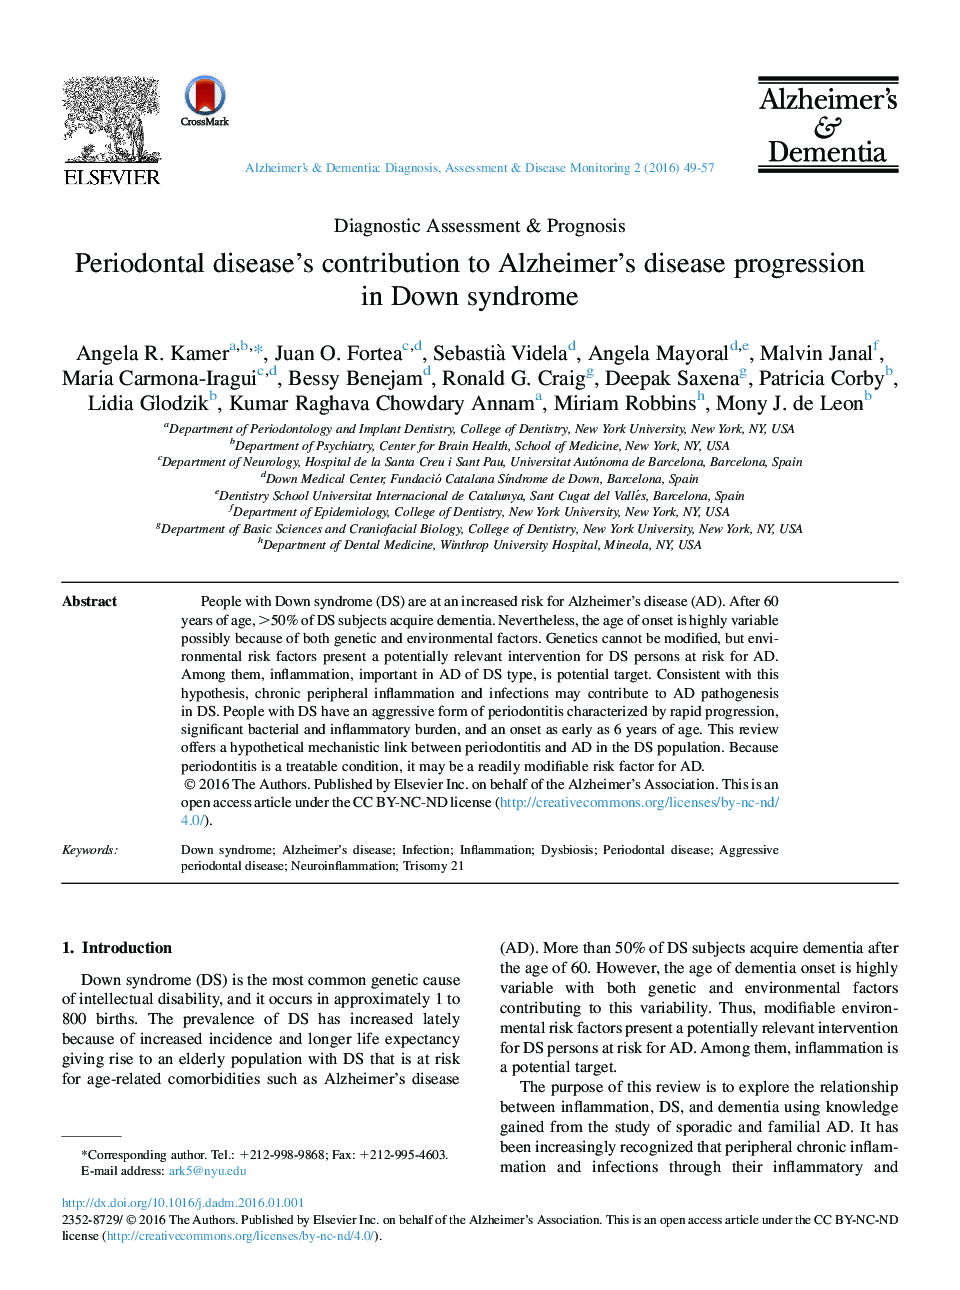 Periodontal disease's contribution to Alzheimer's disease progression in Down syndrome